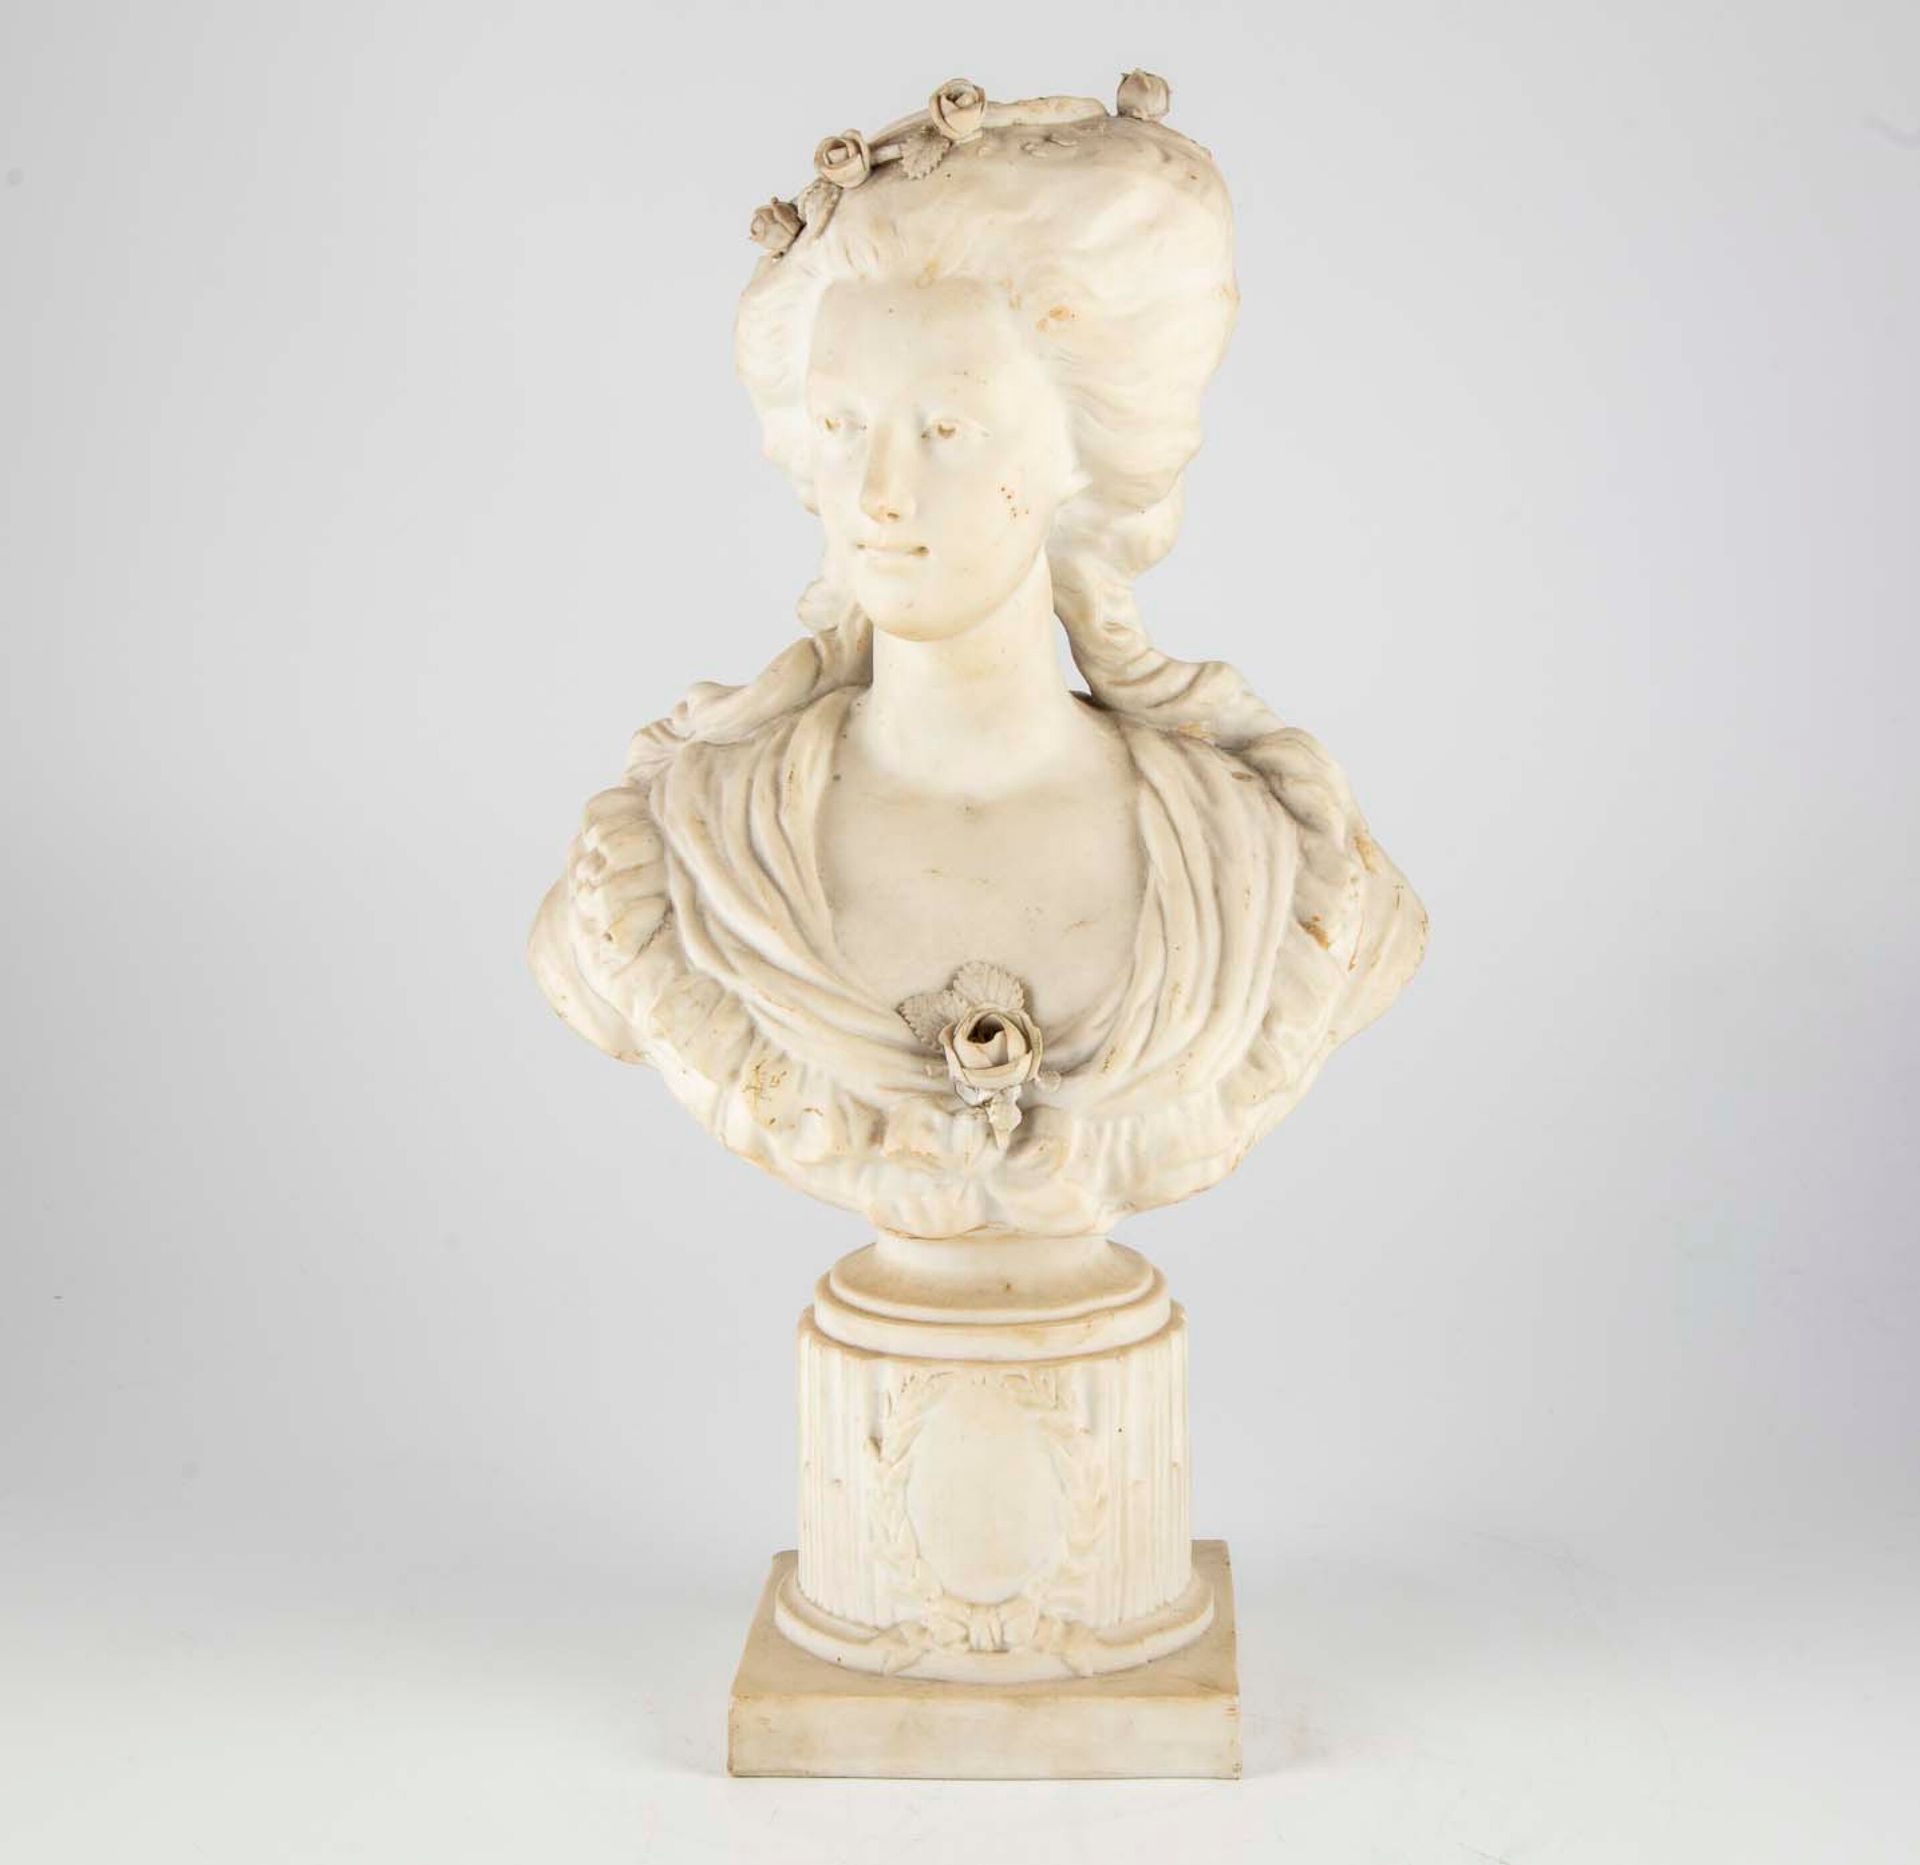 ECOLE FRANCAISE FRENCH SCHOOL end of 19th and beginning of 20th century

Bust of&hellip;